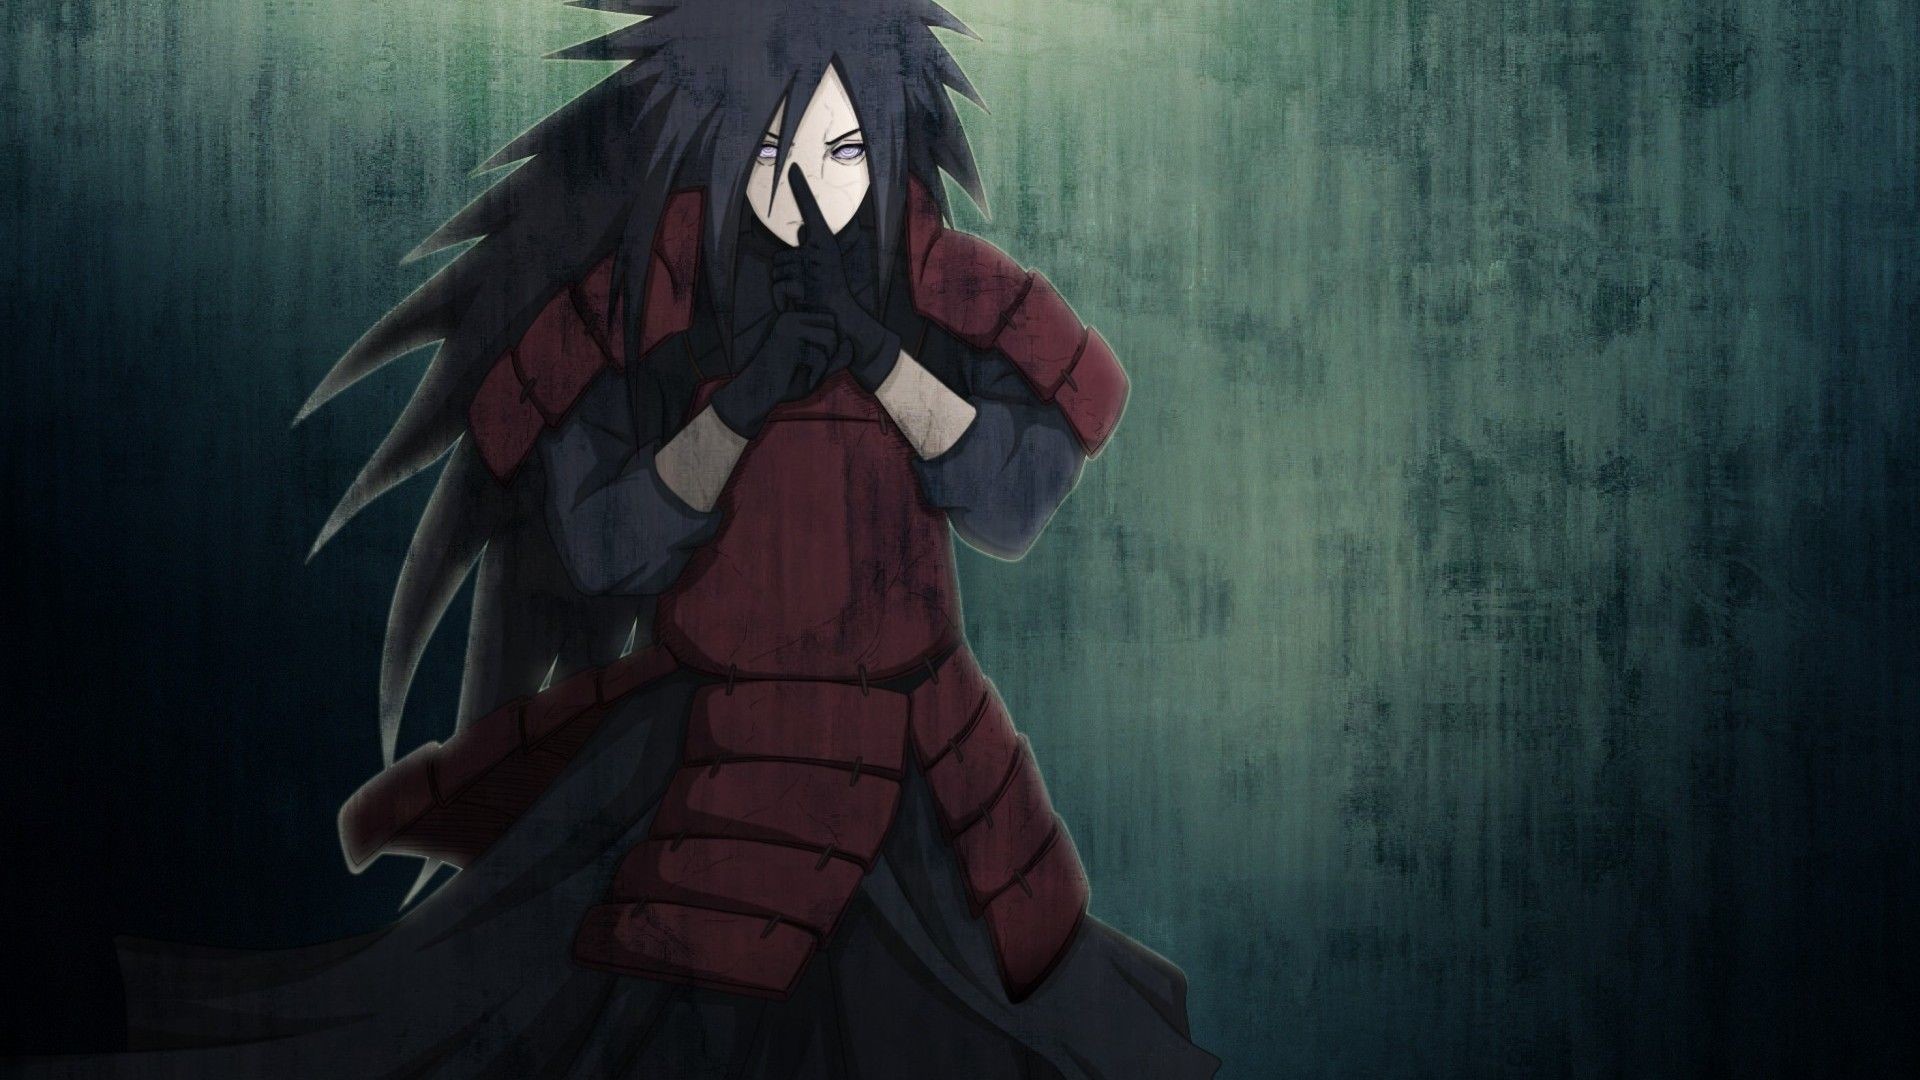 1920x1080 Search Results for “madara uchiha wallpaper hd” – Adorable Wallpapers